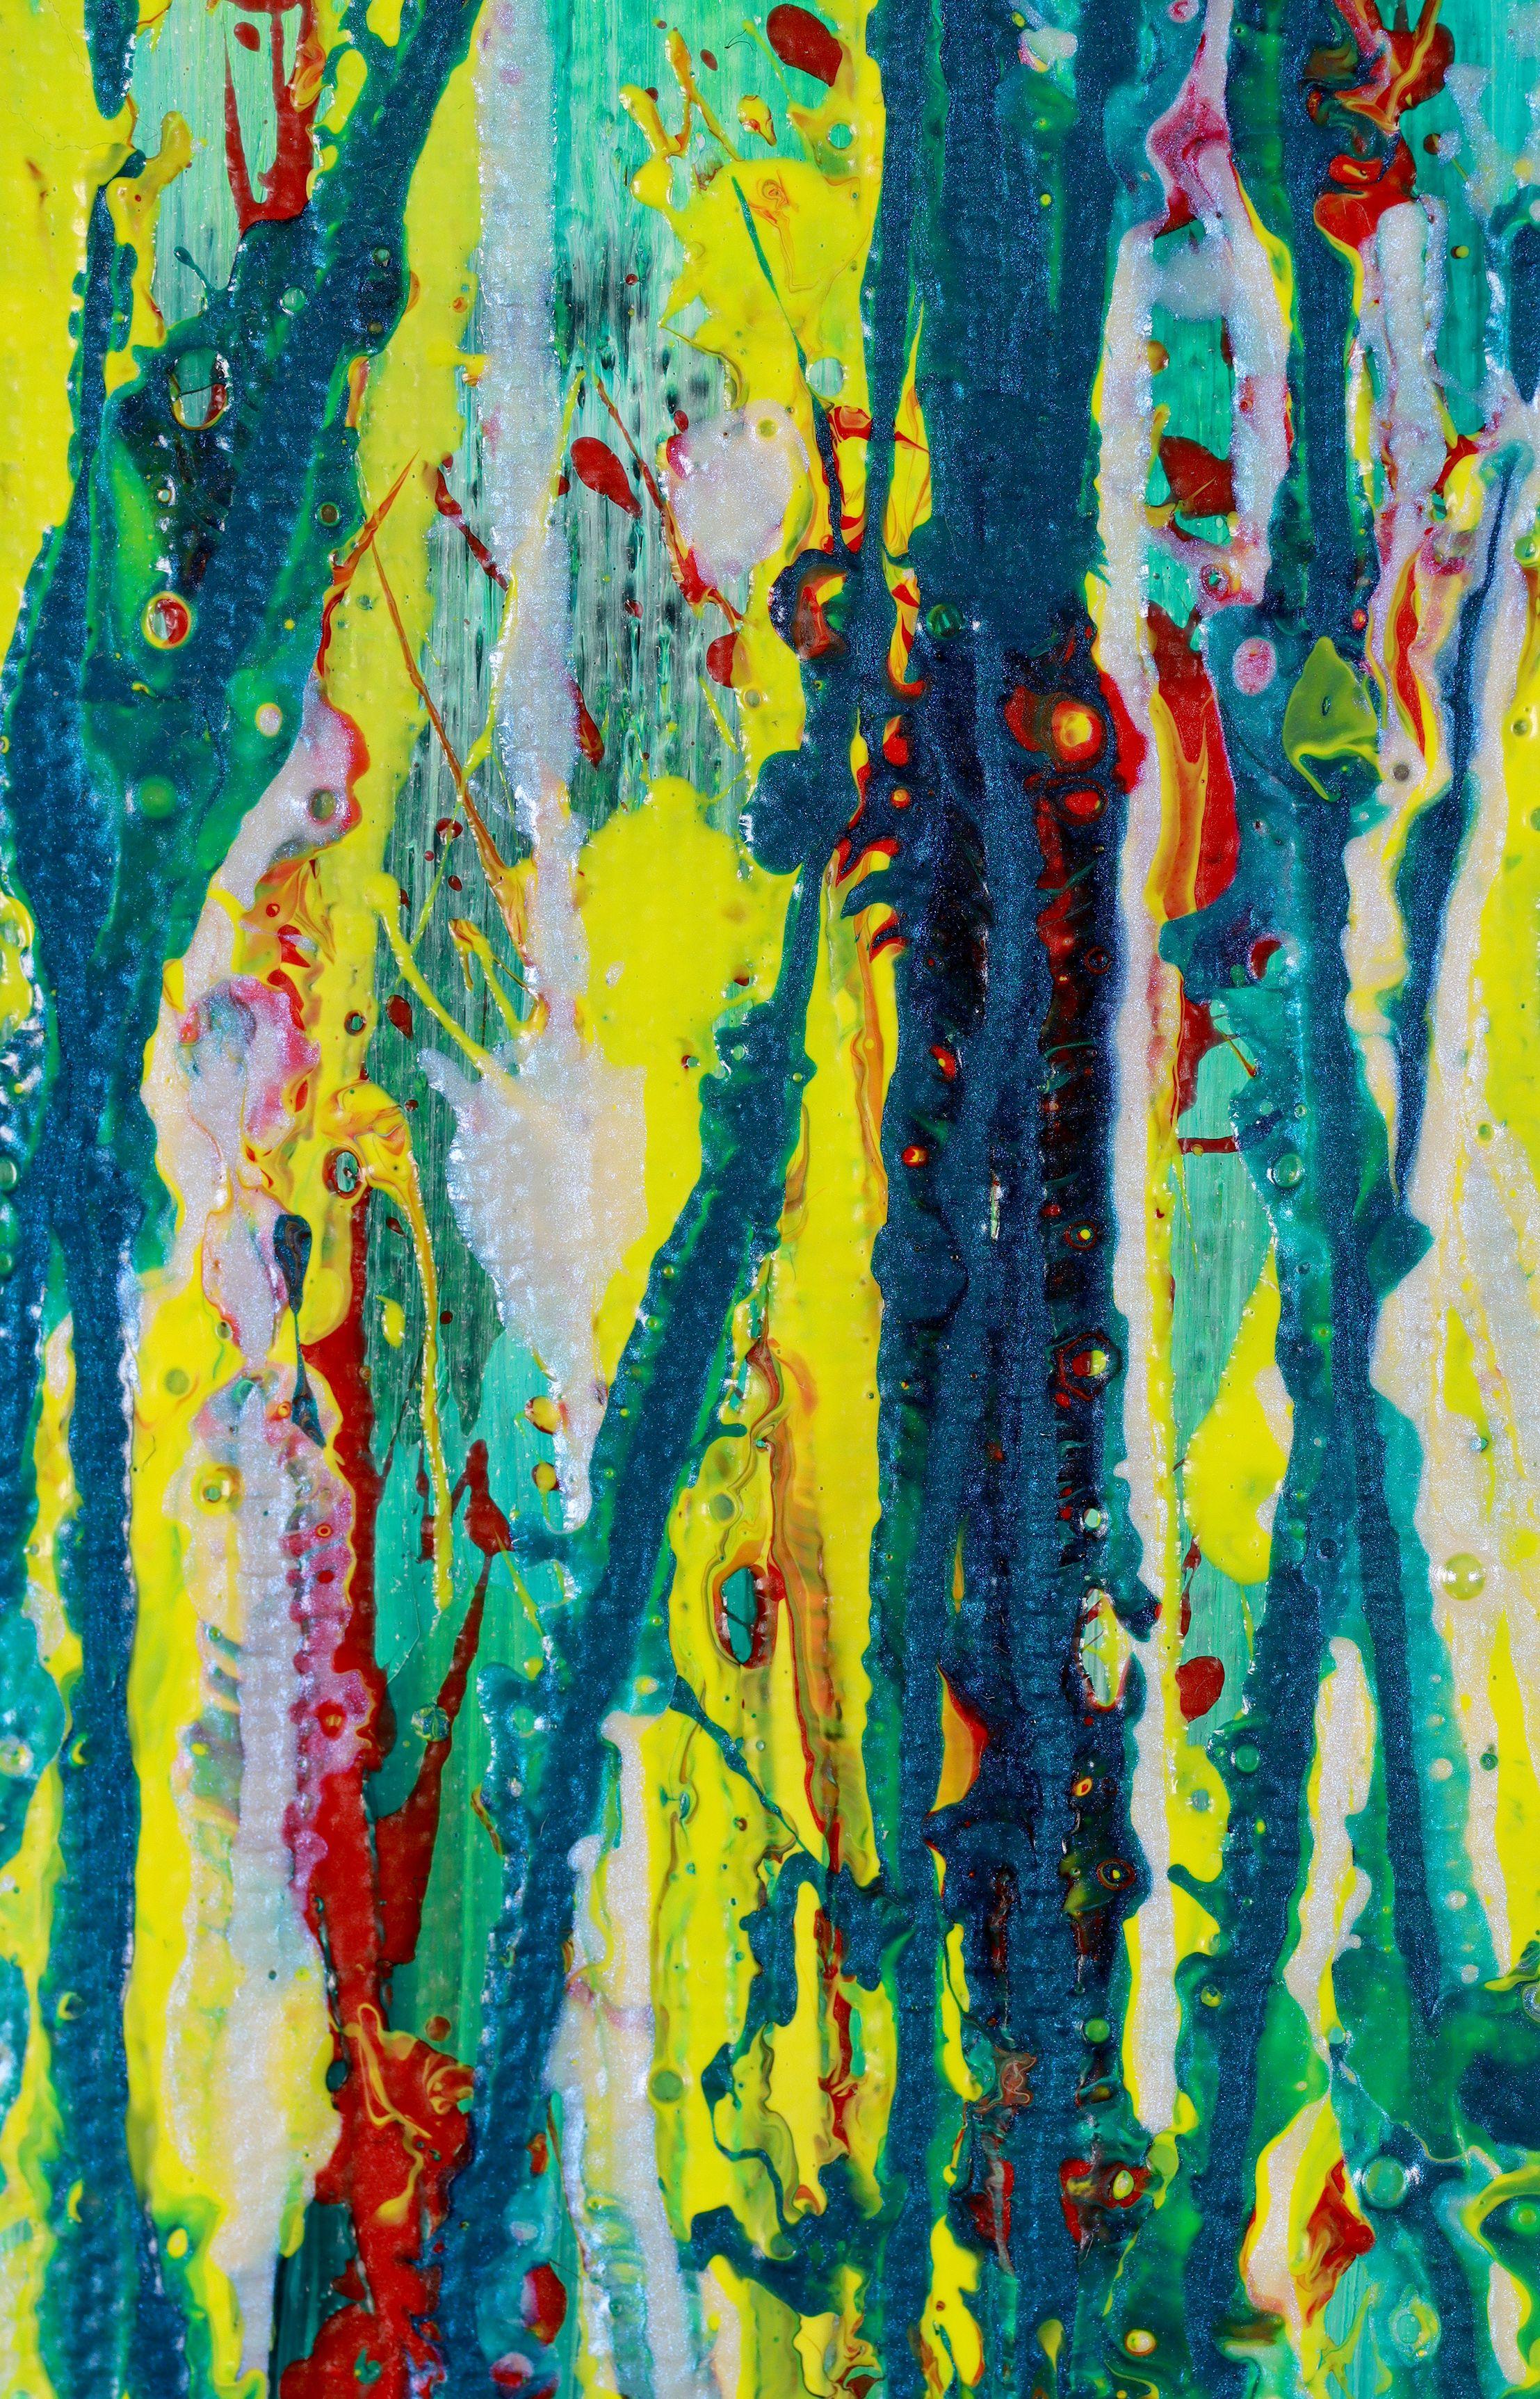 Modern iridescent abstract artwork with many dynamic drizzles and drips over blue deep green and yellow background. Signed in front.    Ready To Hang - No Framing Required!    I include a certificate of authenticity that lists the materials as well